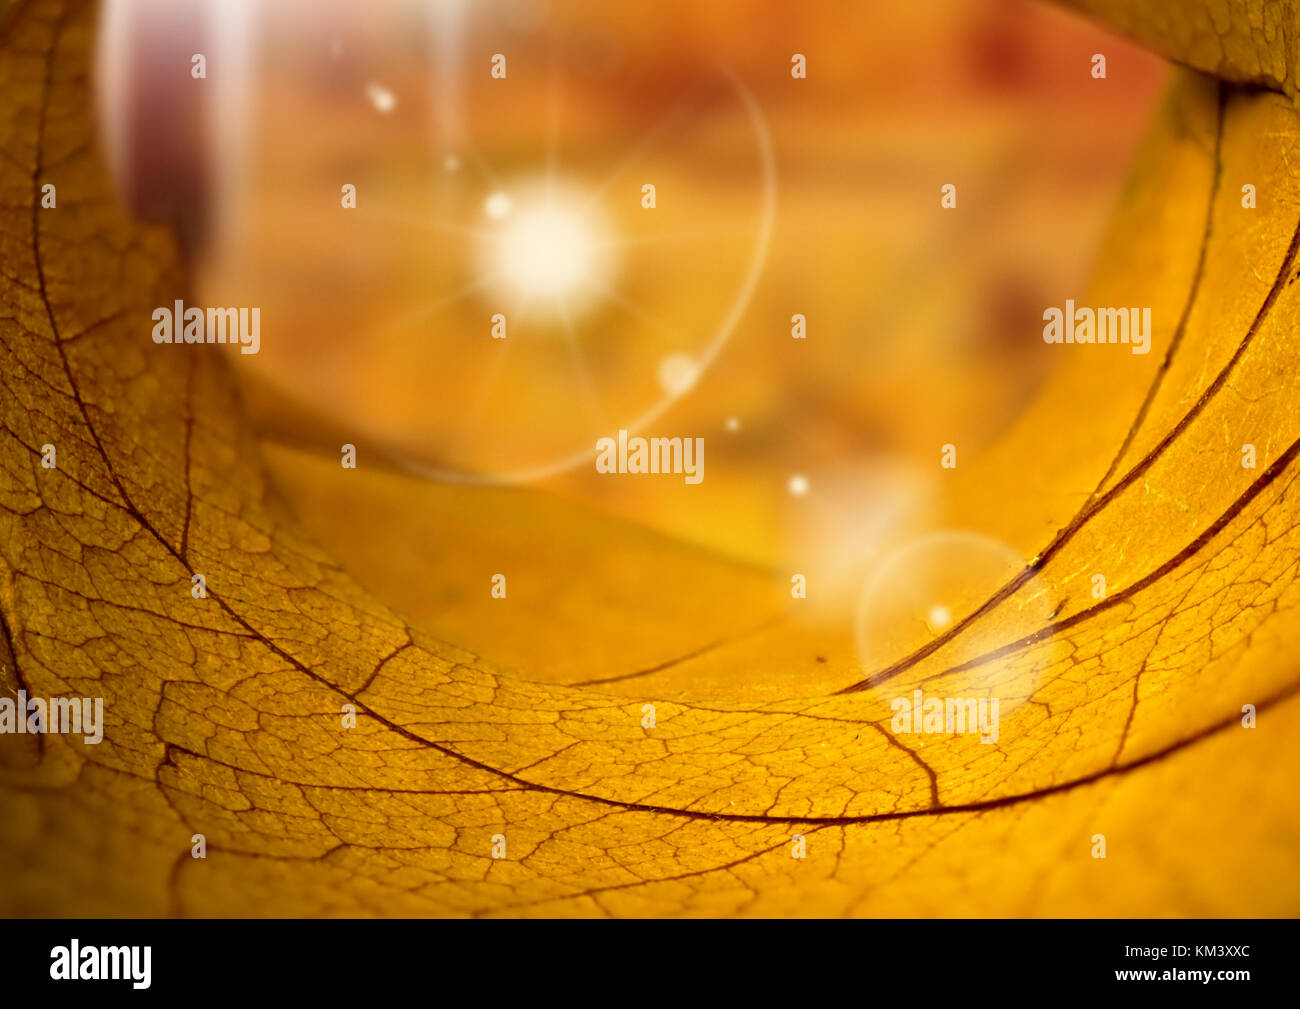 Autumn leaves with fall blurred background Stock Photo